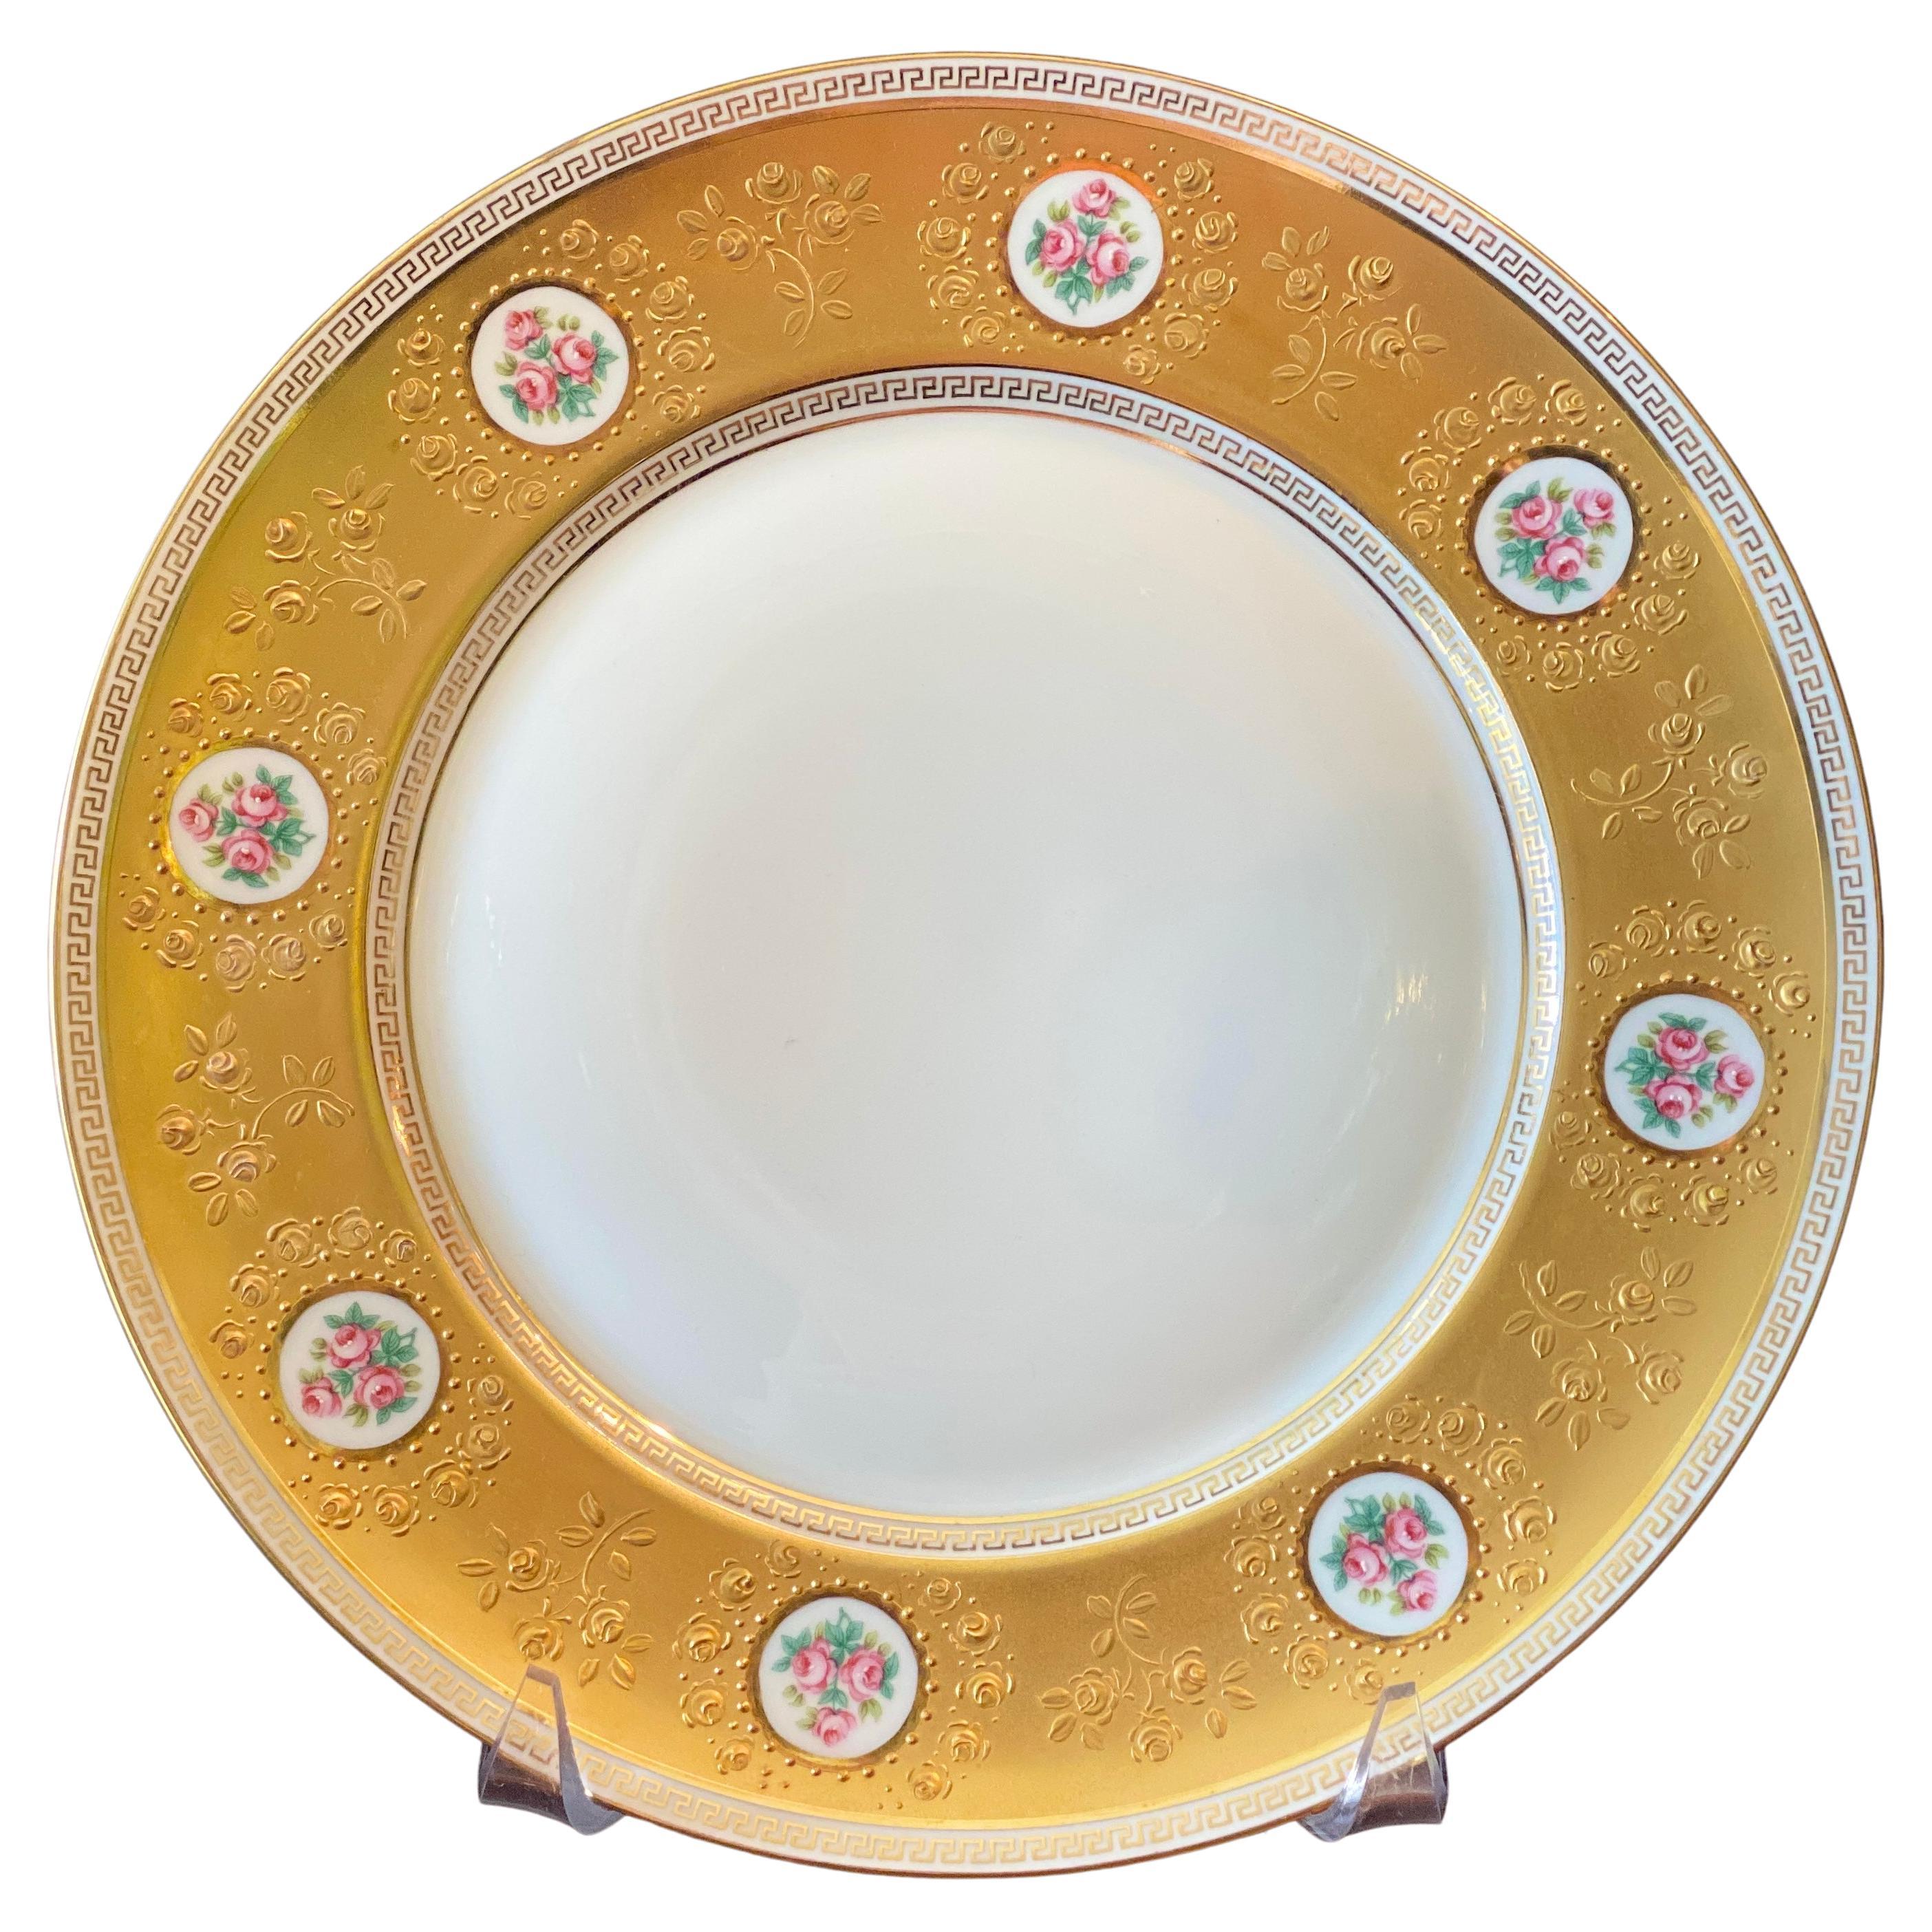 Set of 36 Dinner Plates - Raynaud Incrustation Duchesse China  by Limoges  For Sale